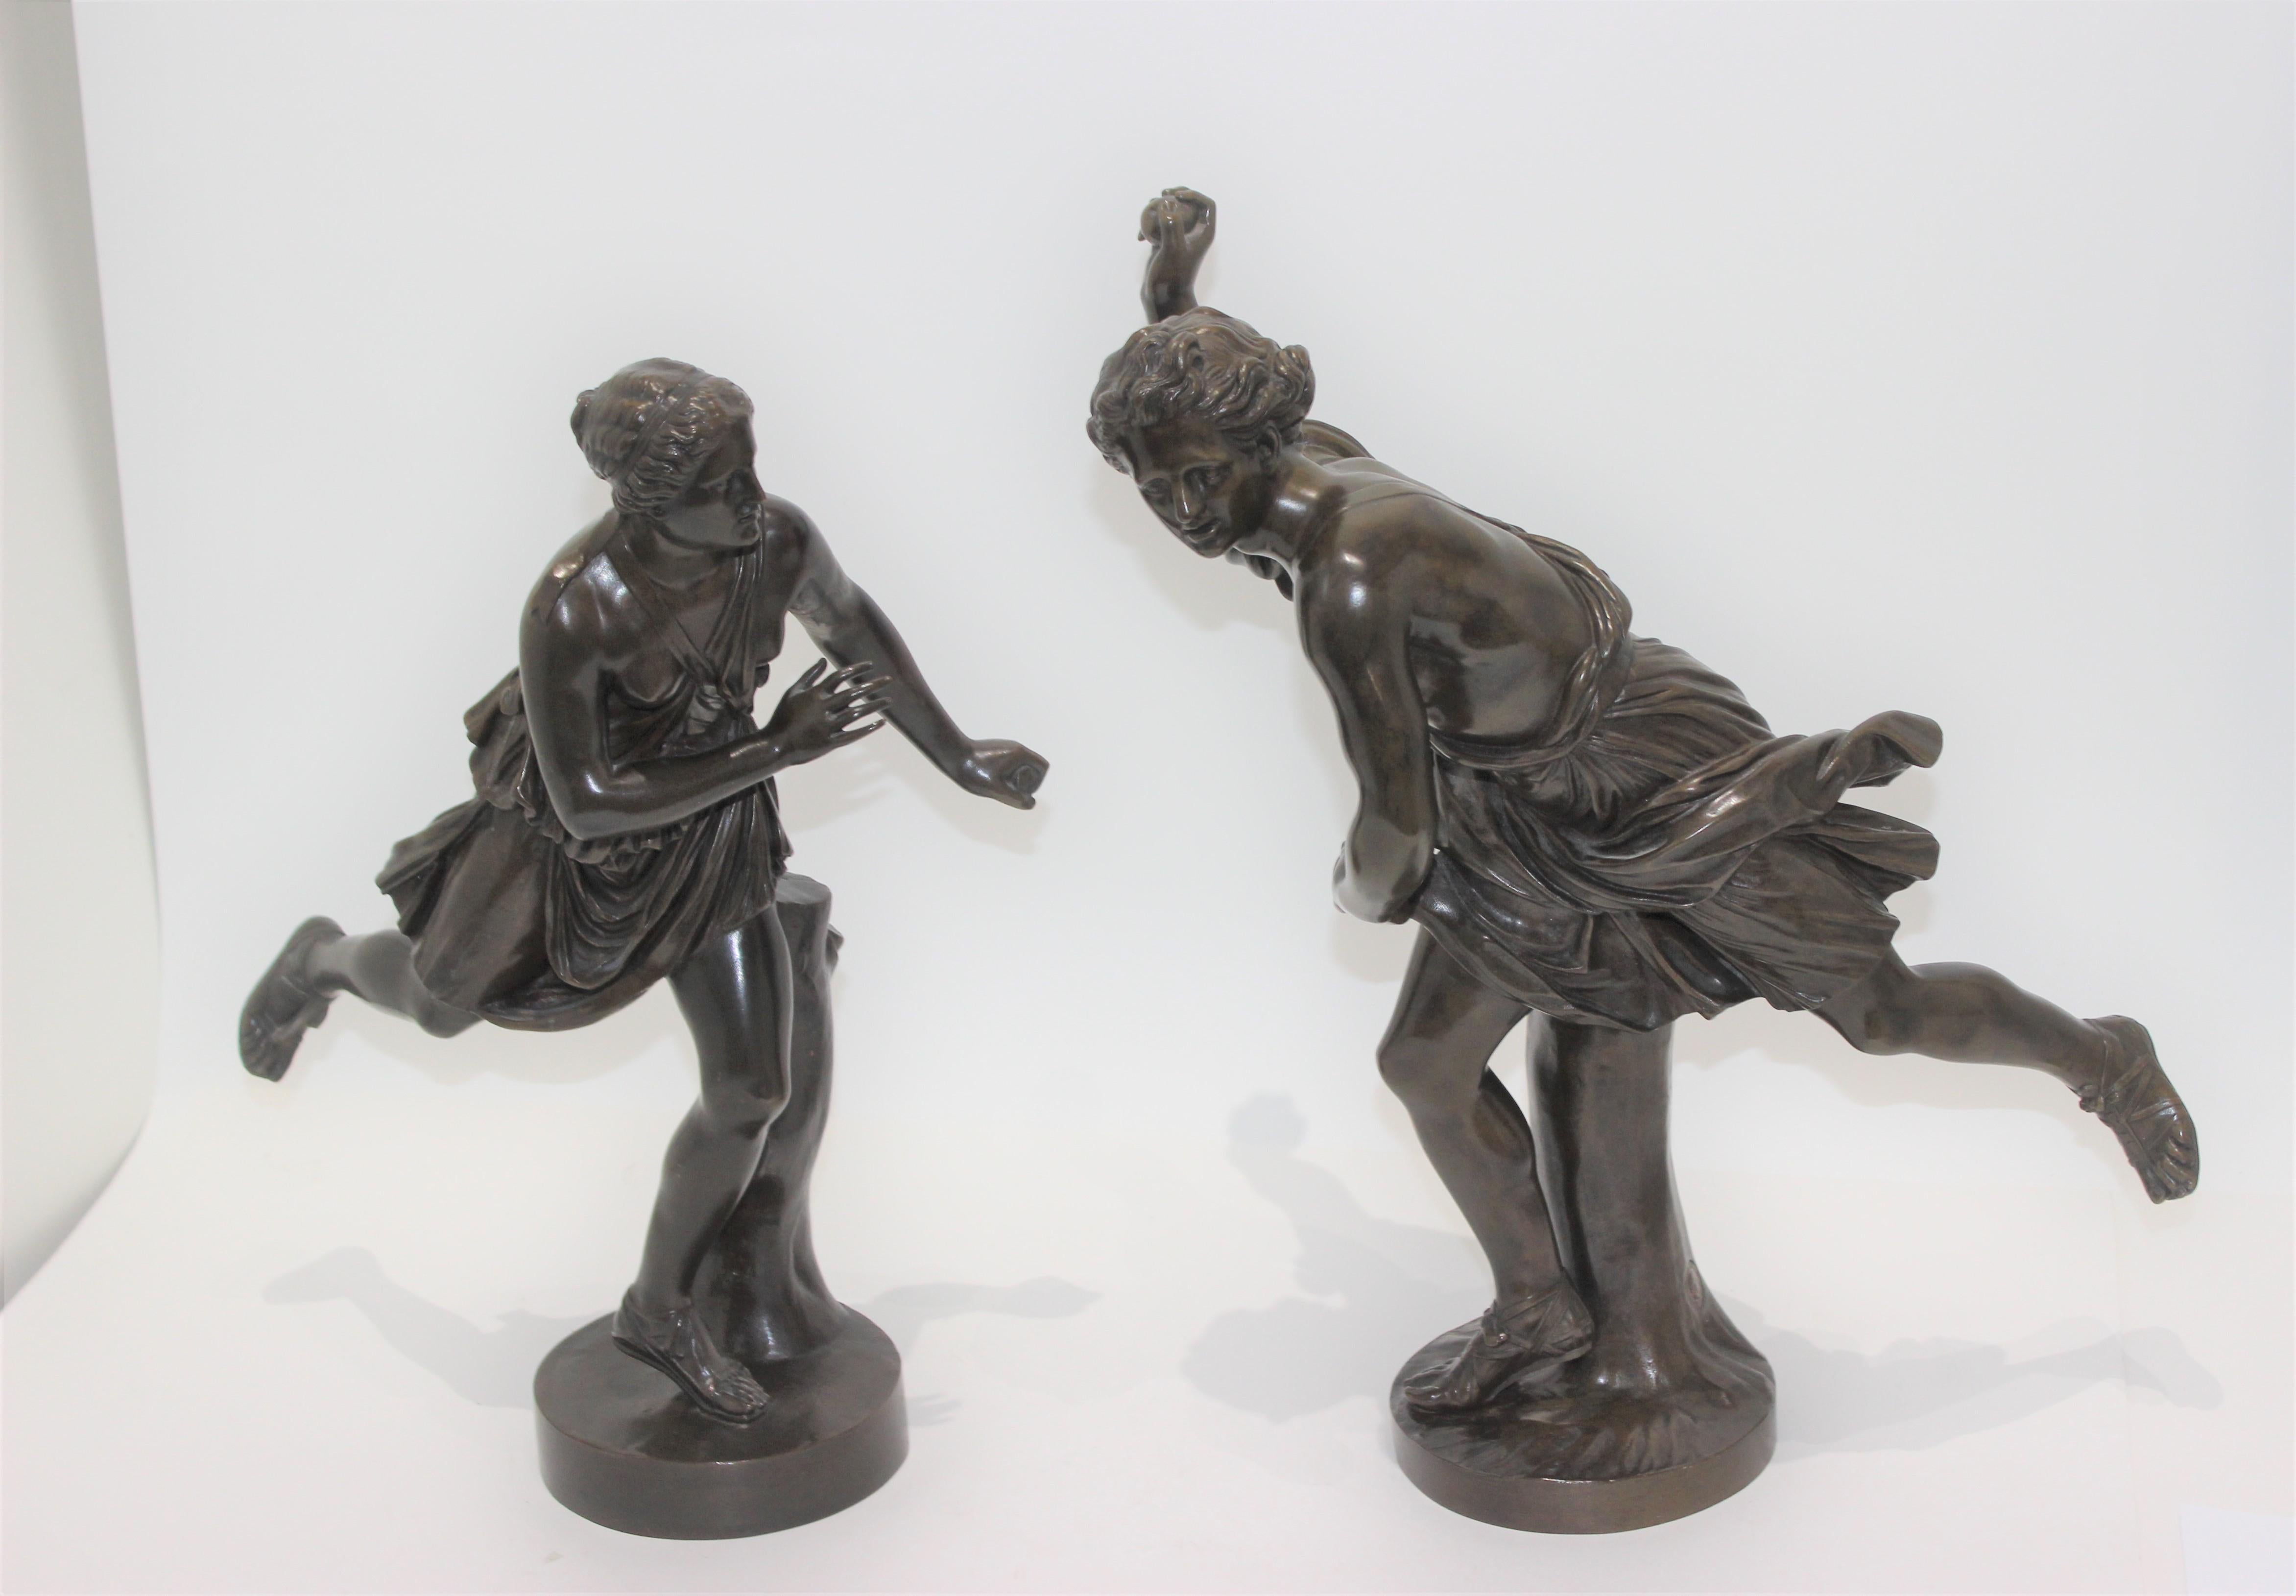 This set of two late 19th Century F. Barbedienne bronzes were acquired from a Palm Beach estate.

FYI
Atalanta, the Greek Goddess of Running, is one of the lesser-known gods worth knowing about.  Atalanta was abandoned in a forest on a mountaintop